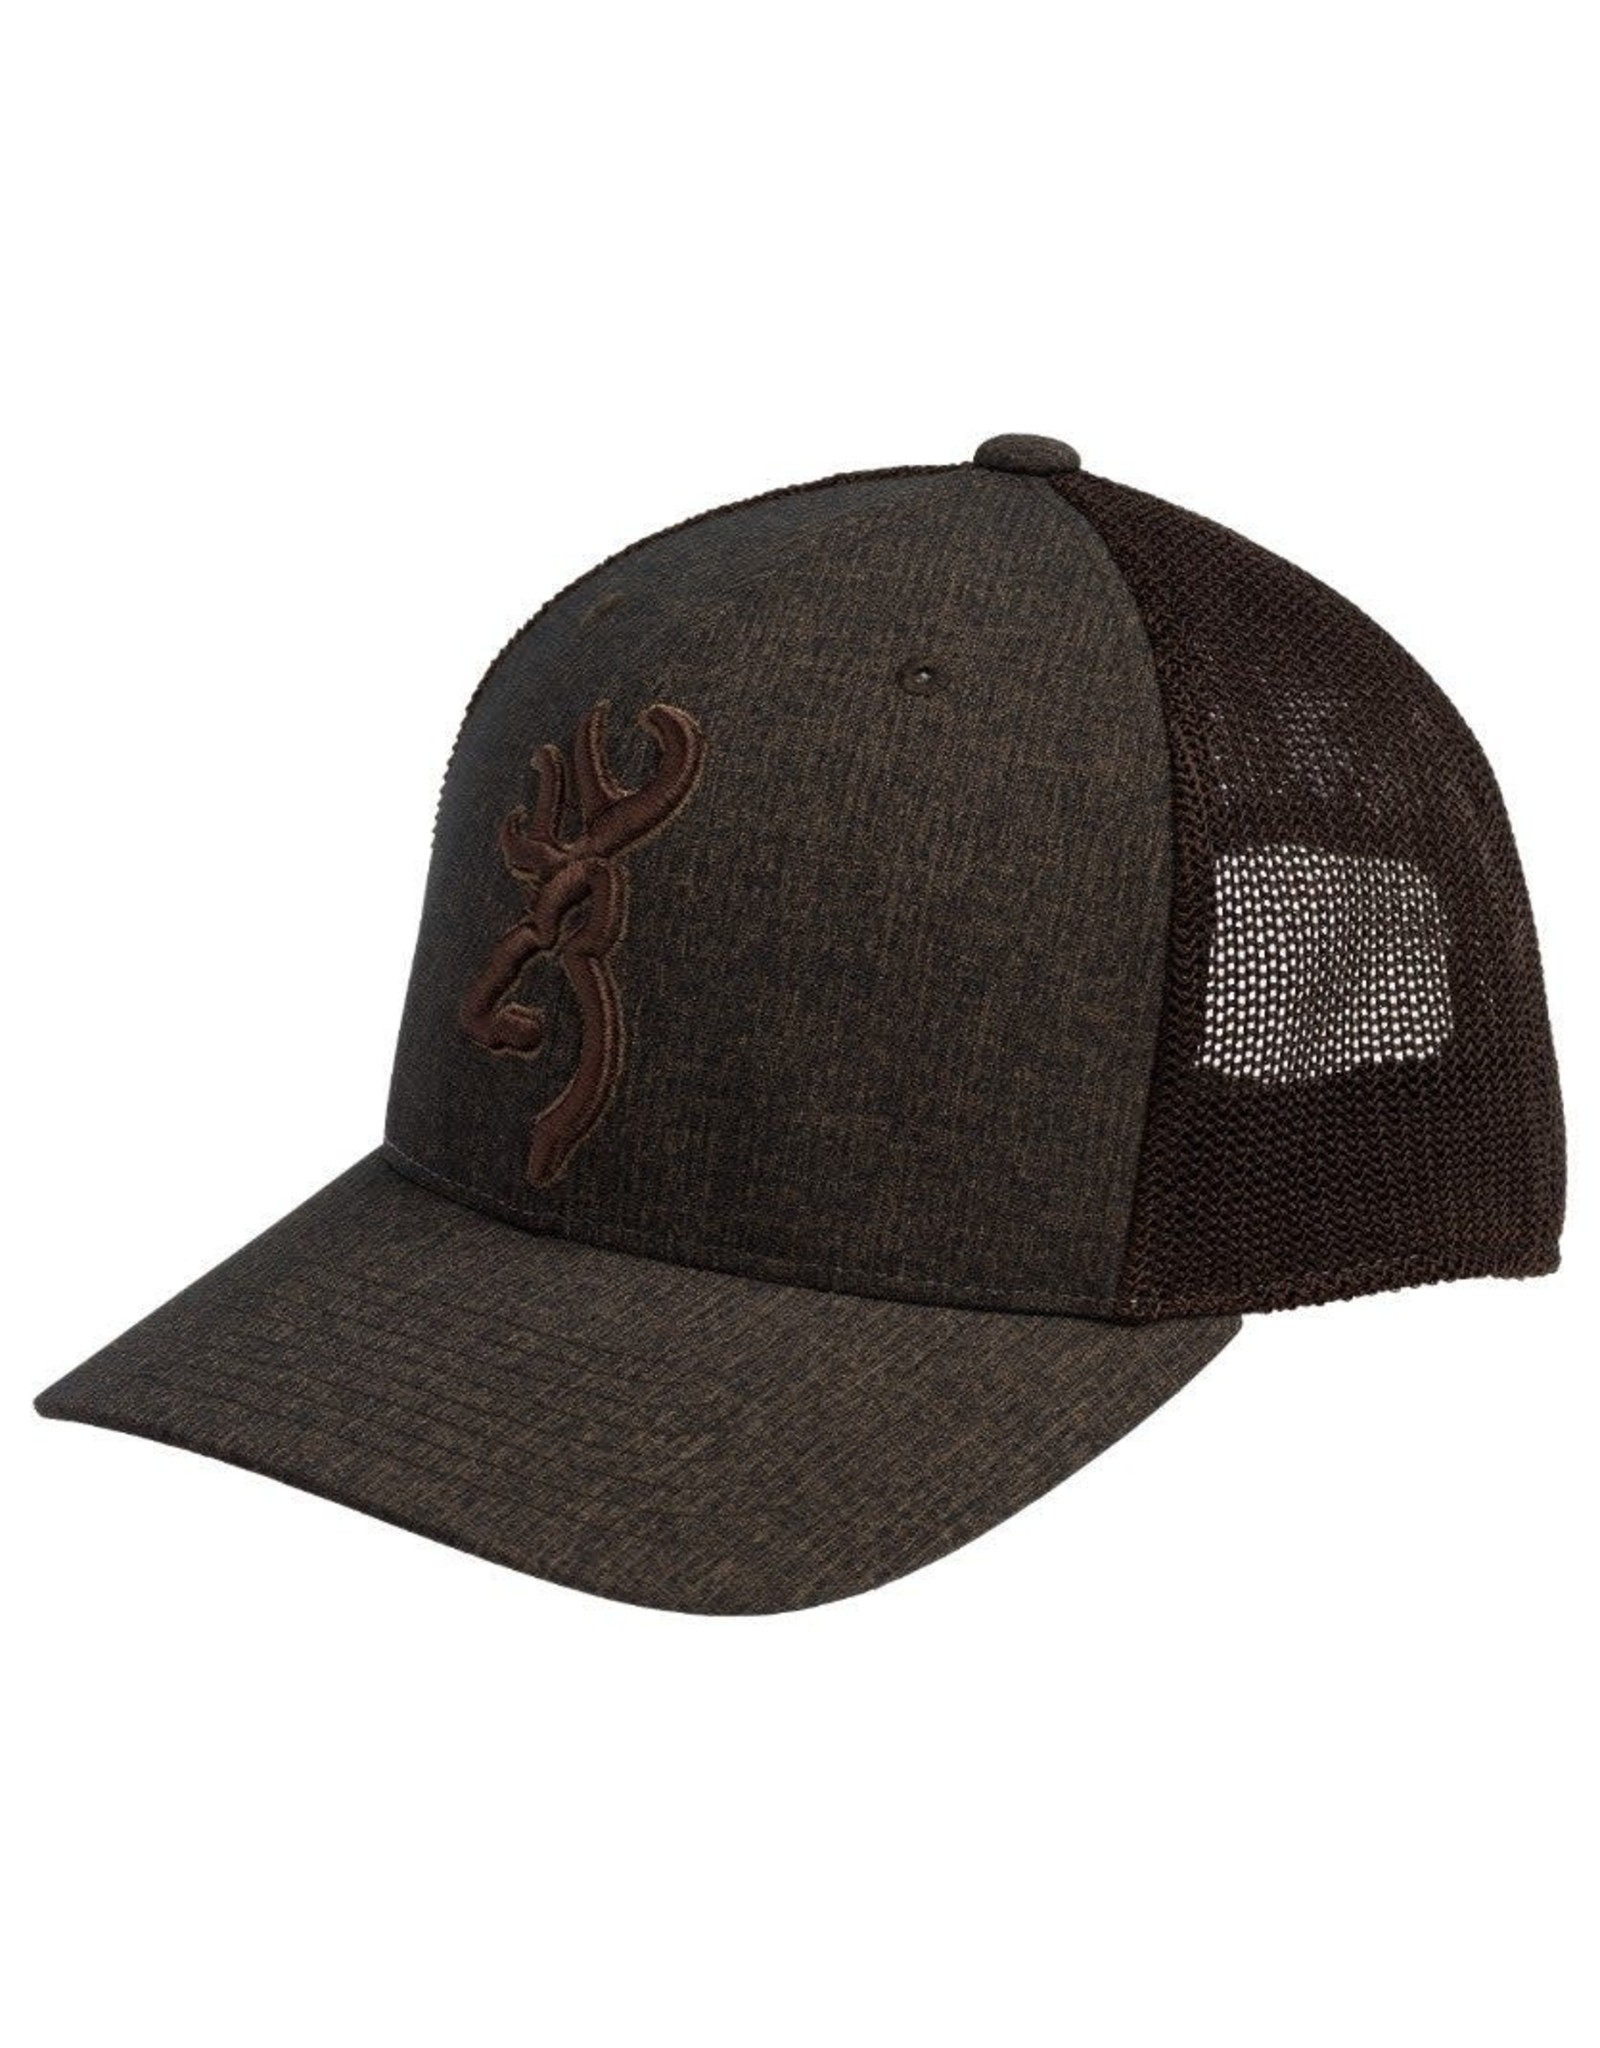 Browning Realm Cap - Olive